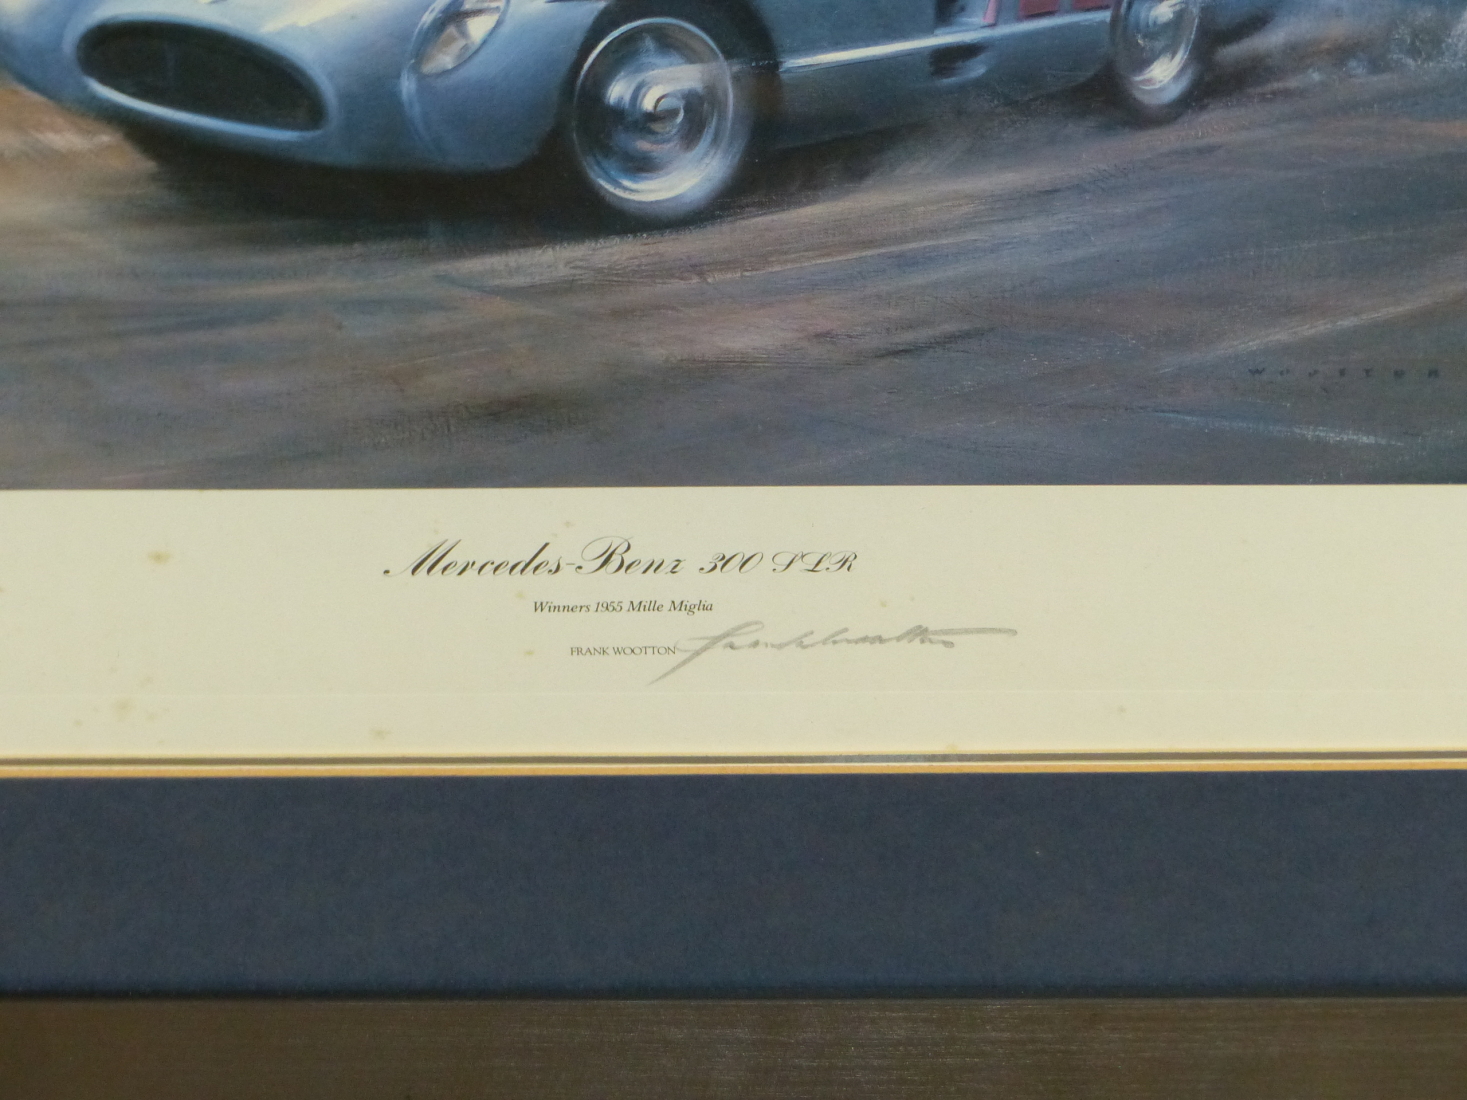 RODNEY DIGGINS, "STERLING MOSS" MONACO 1956, WATERCOLOUR SIGNED AND DATED 1980,TOGETHER WITH - Image 9 of 11